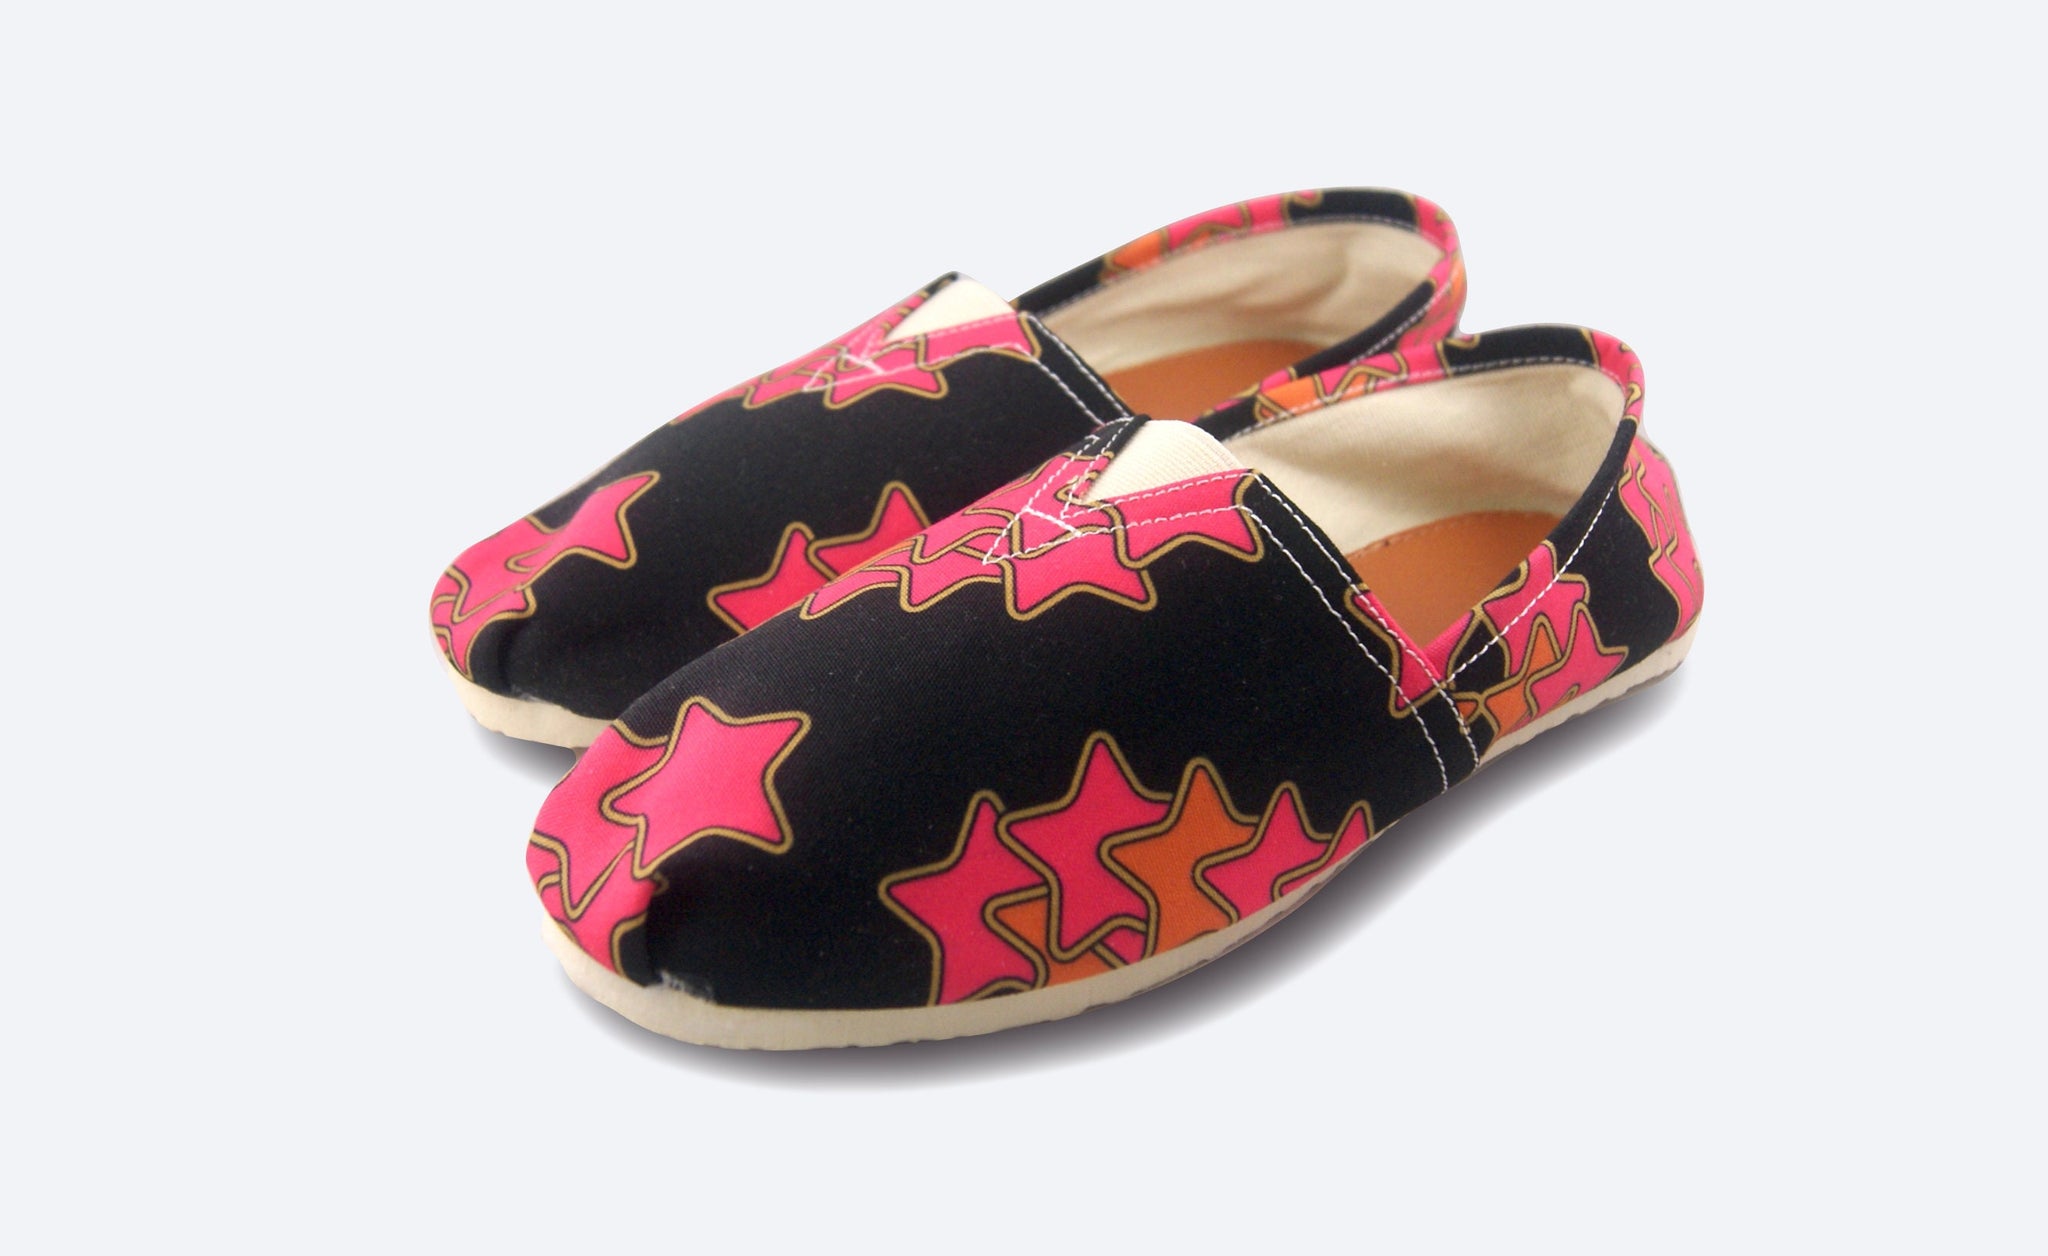 The Disco Starshower Flat | A Fabulous Shoe for Dazzling | Espadrille Style Loafer with a Groovy Black and Pink Star Print | Goose Taffy